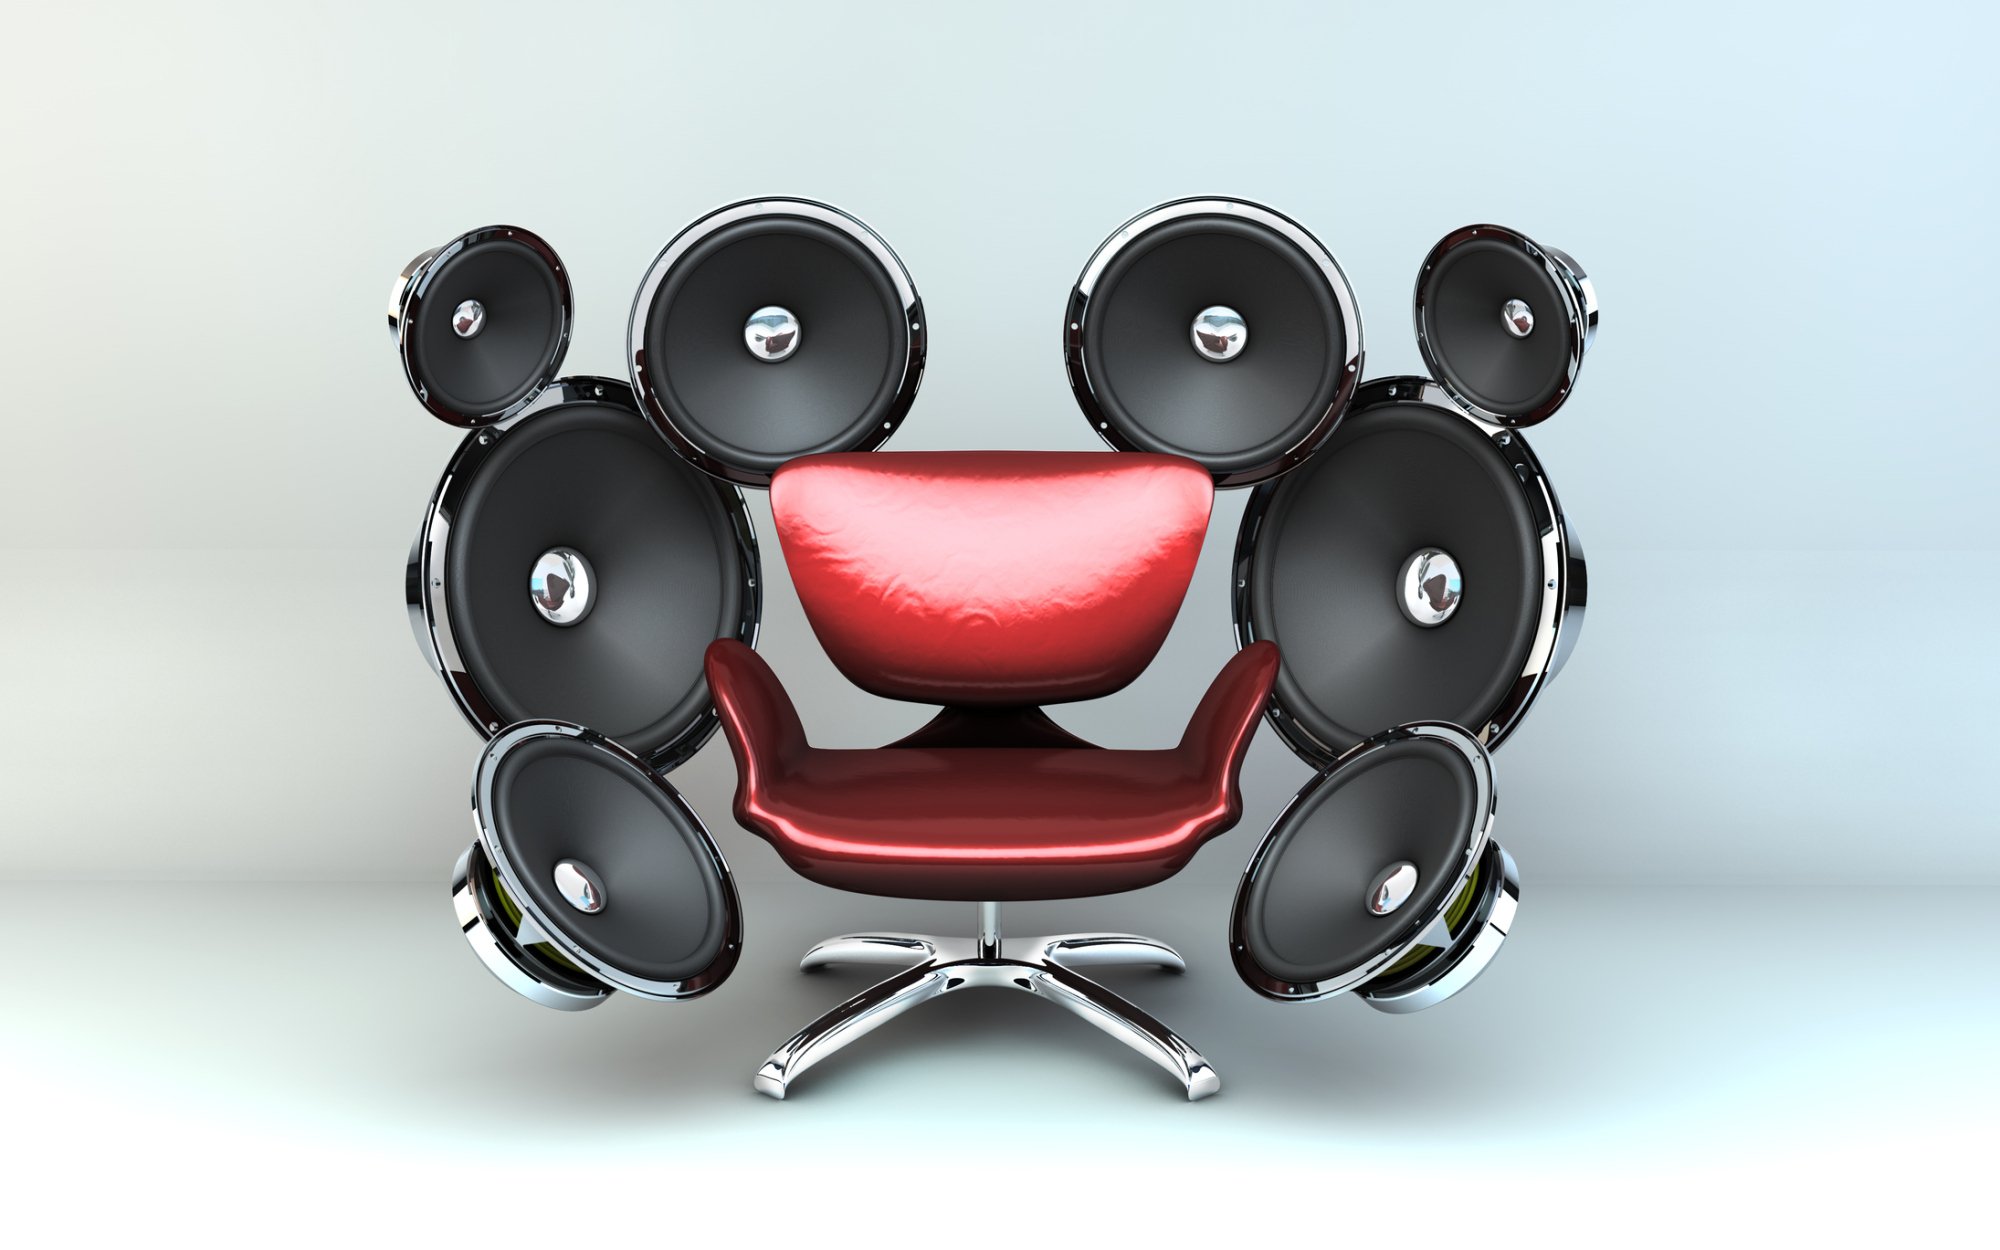 Leather chair surrounded by speakers